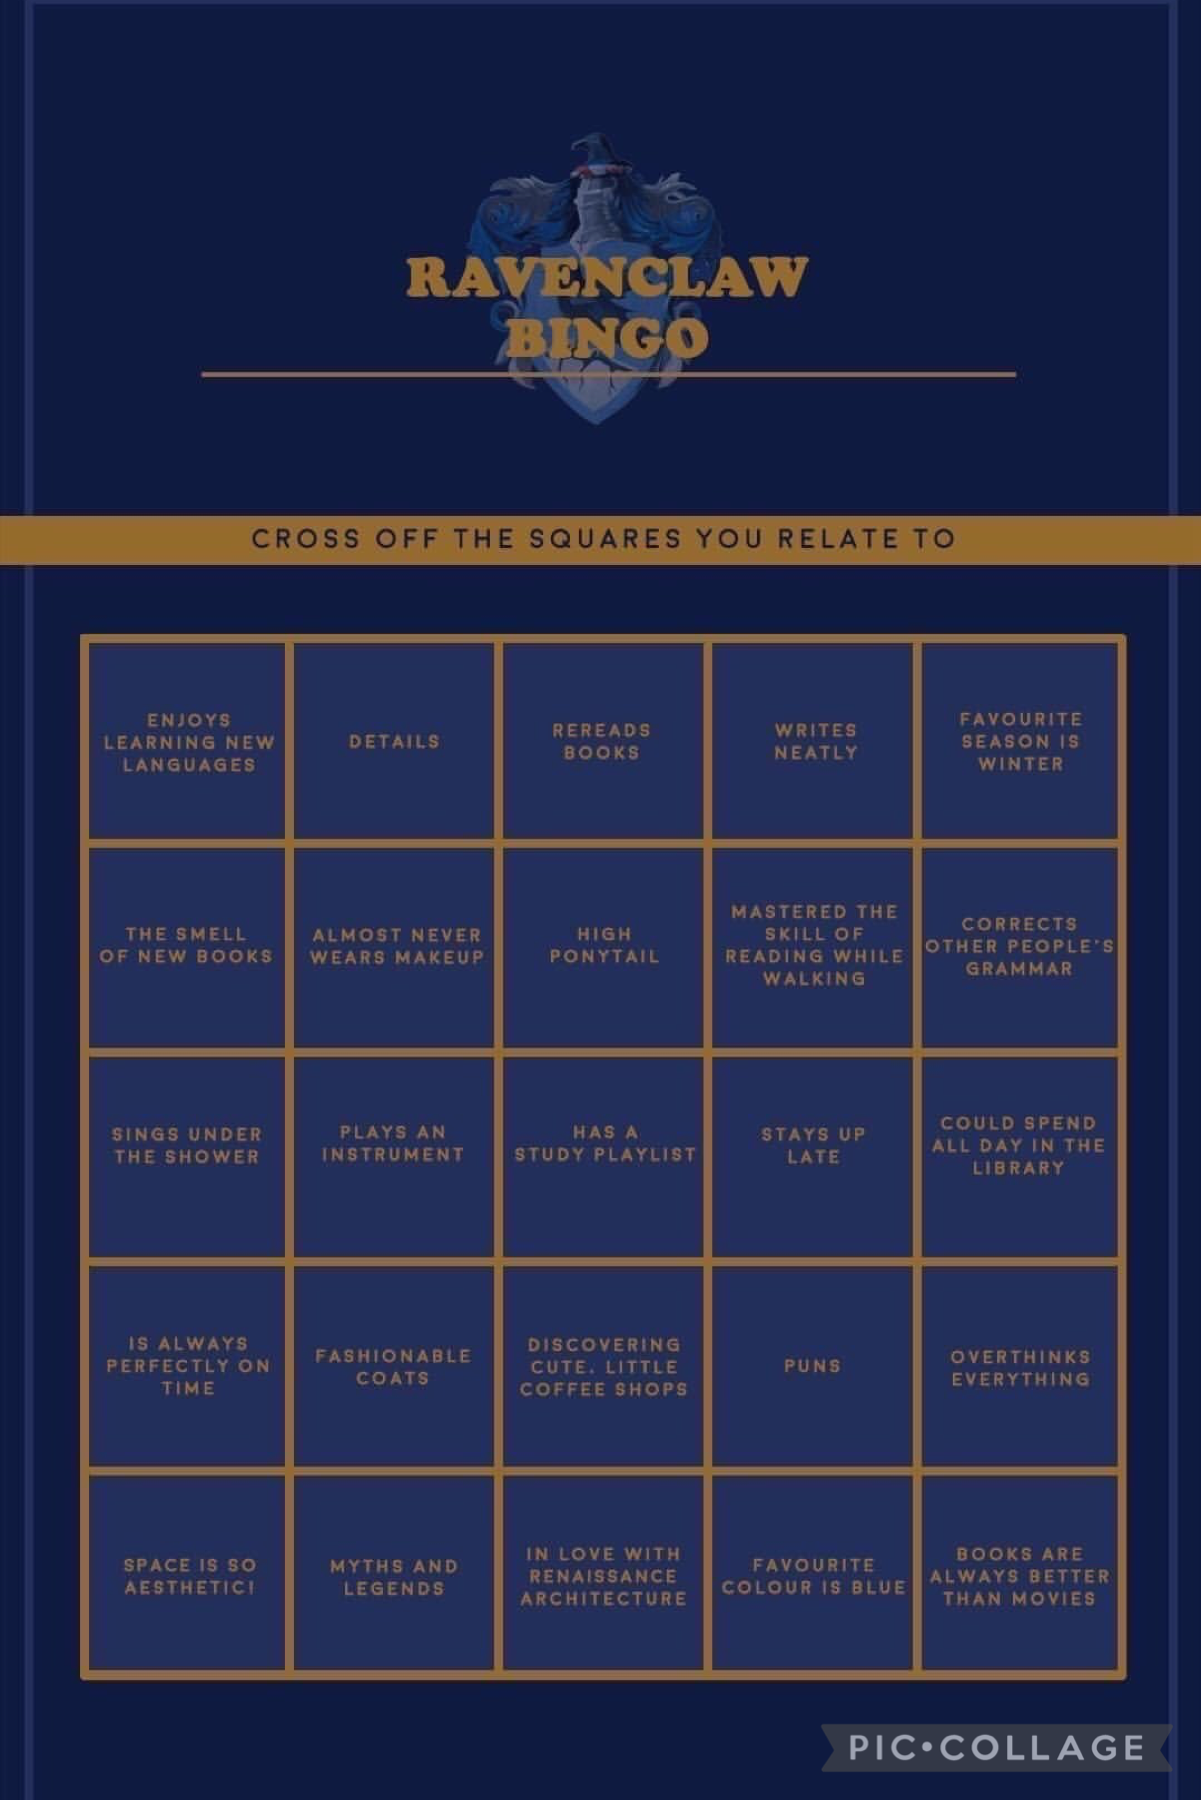 I didn’t make this myself, but you know how much I love a good bingo 